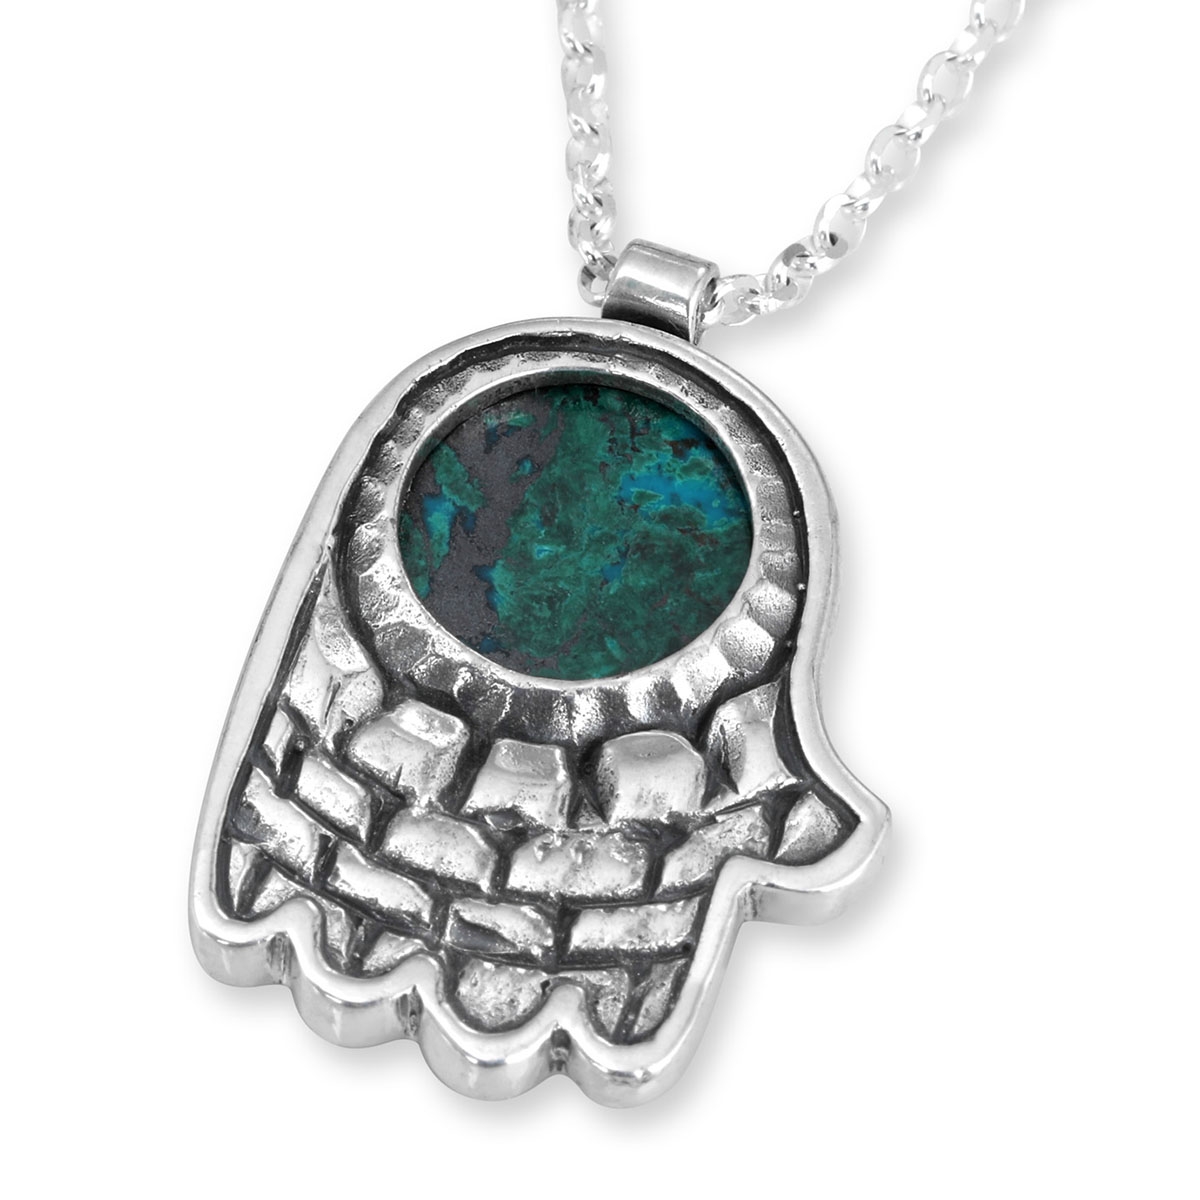 Details about   Large Ornate Sterling Silver & Beautiful Turquoise Pendant Necklace 